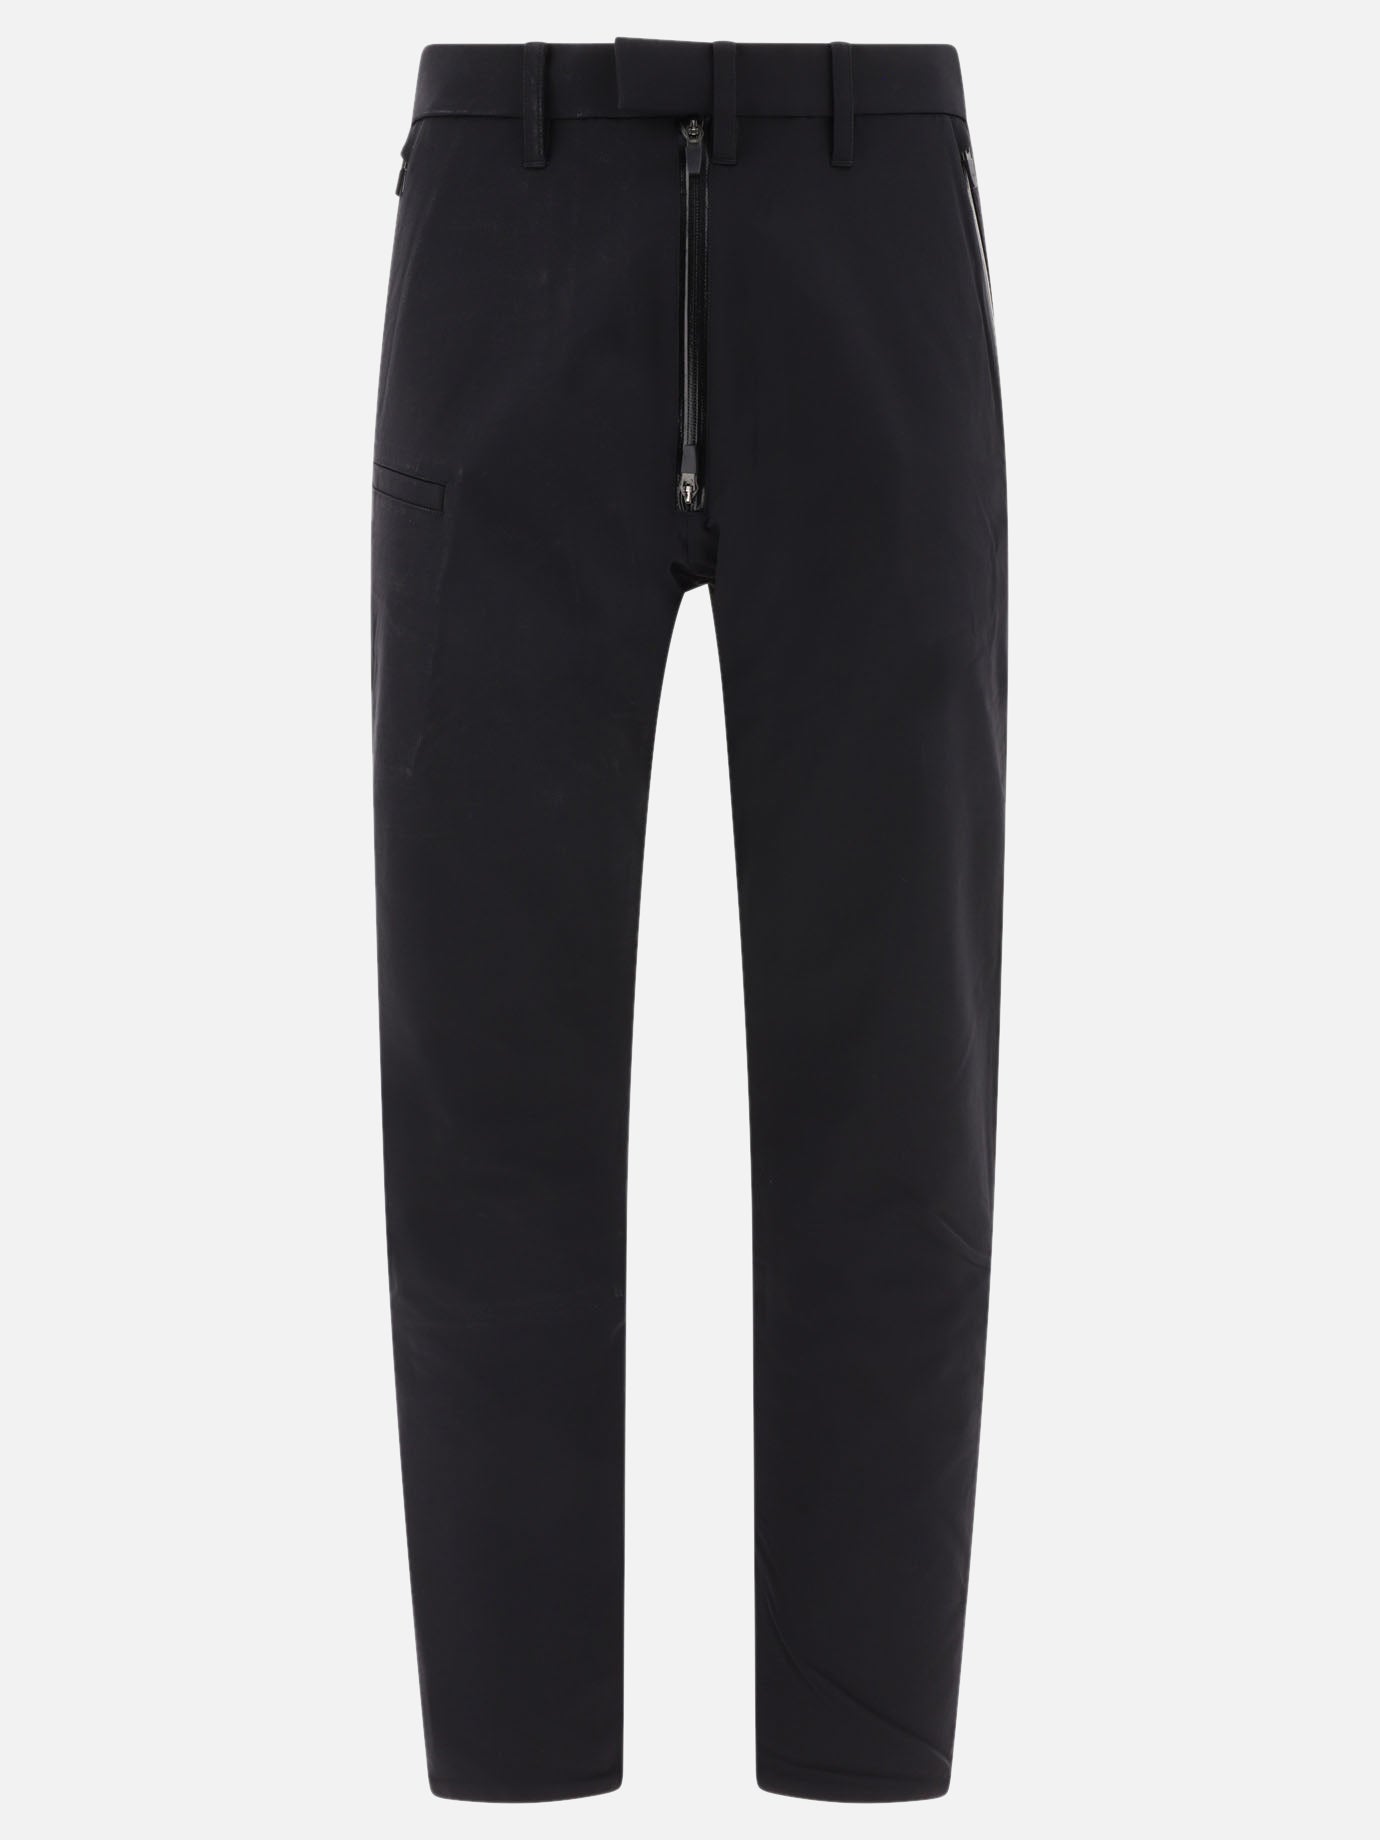 "P47-DS" trousers